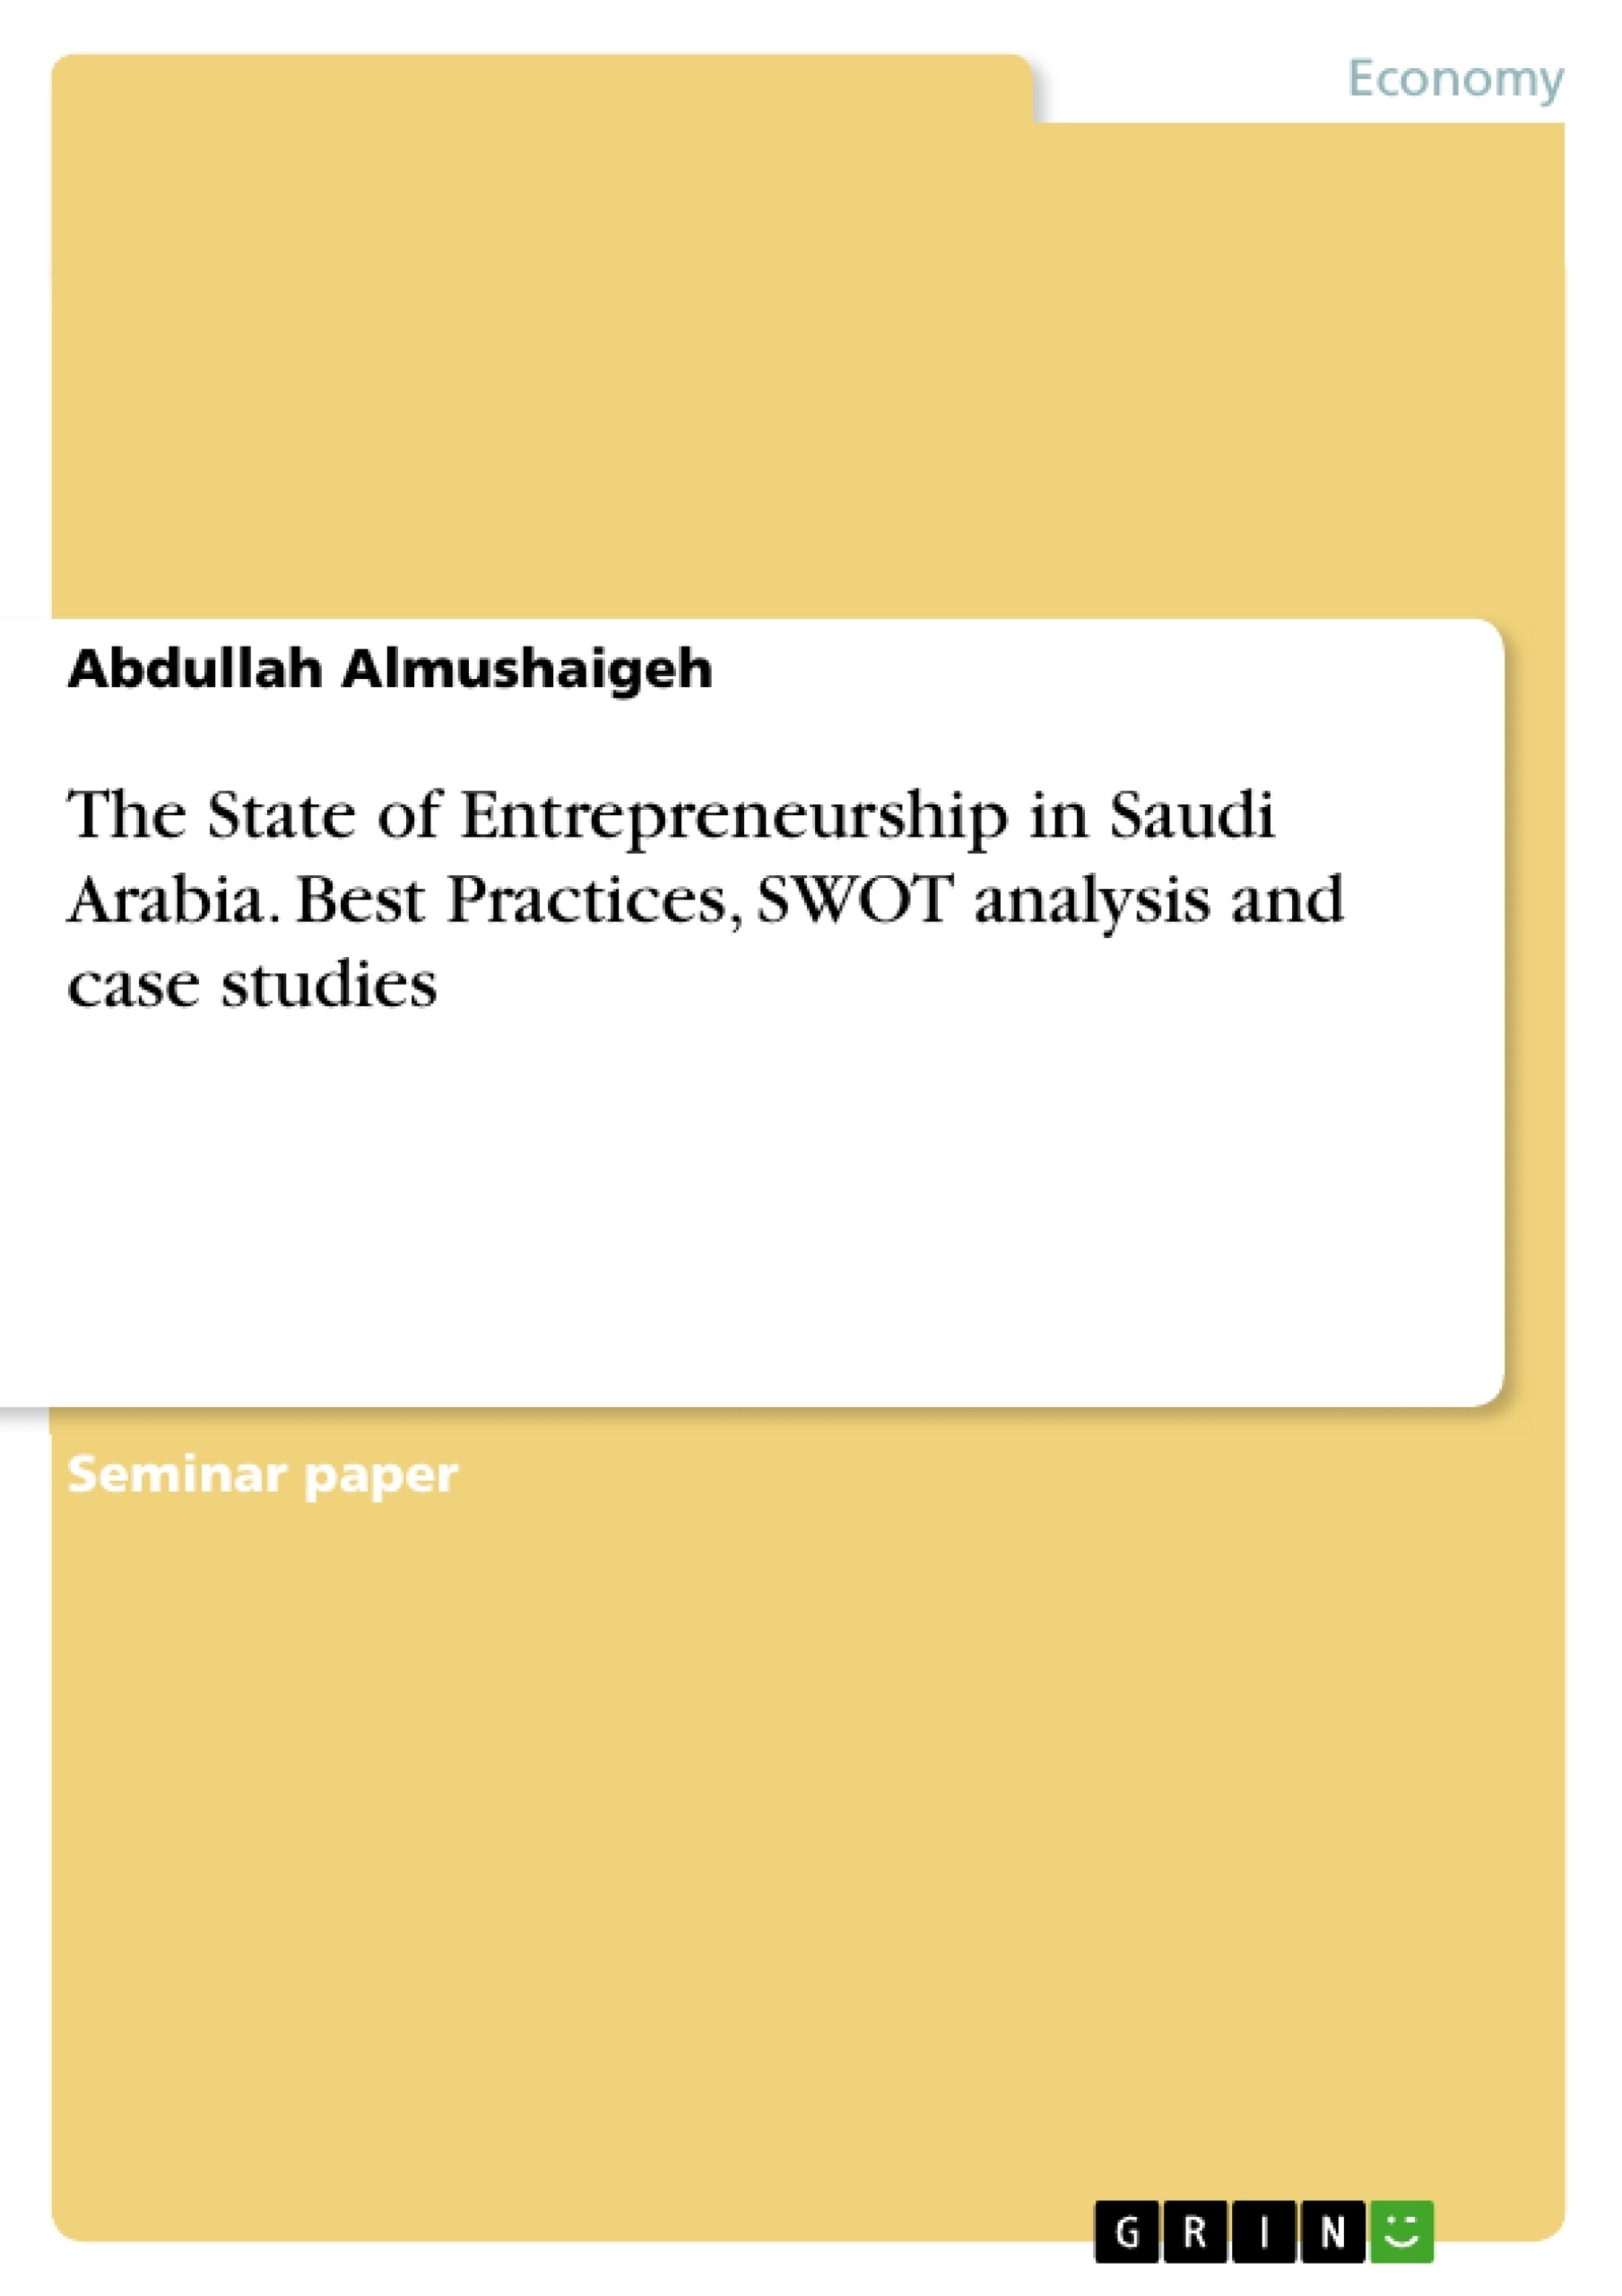 Title: The State of Entrepreneurship in Saudi Arabia. Best Practices, SWOT analysis and case studies